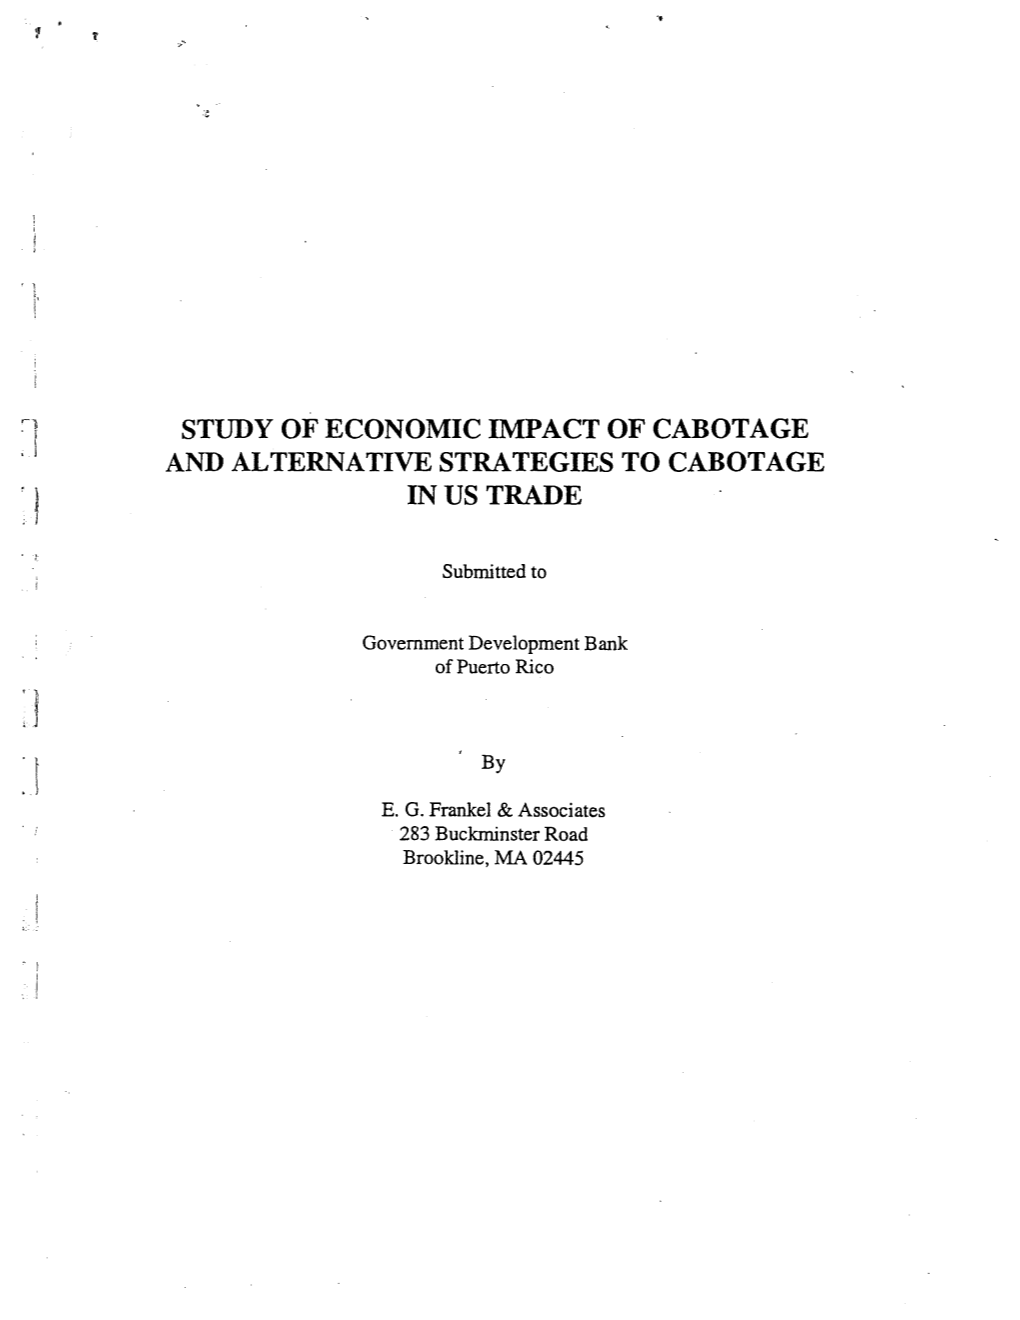 Study of the Economic Impact of Cabotage, and Alternative Strategies